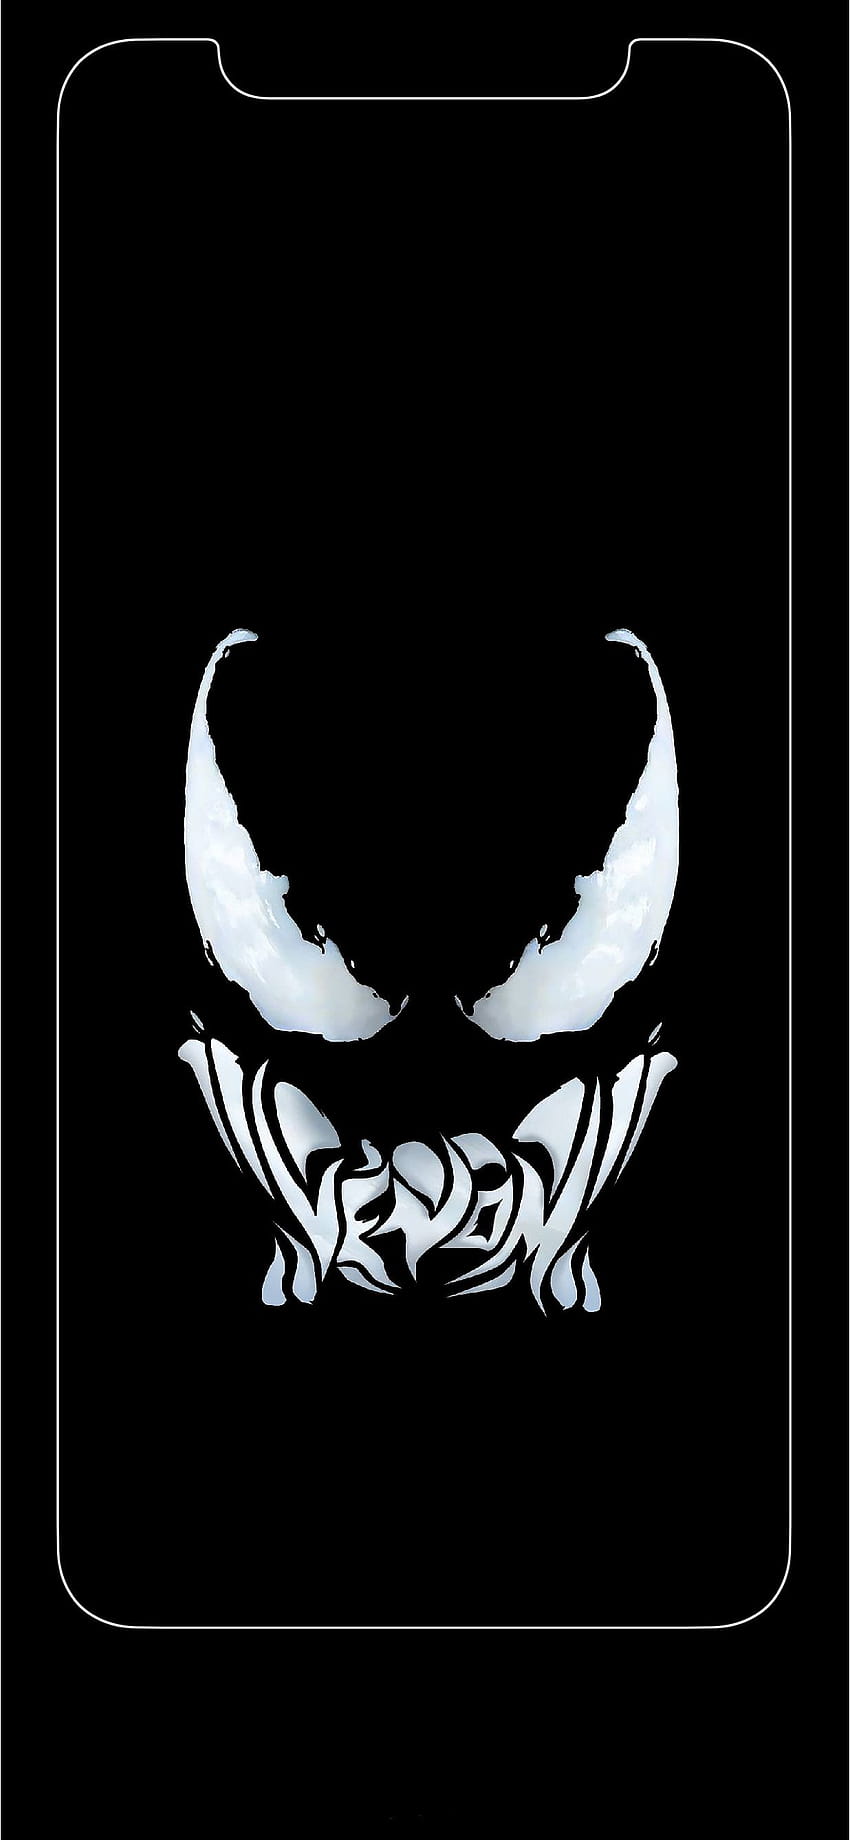 Maybe I like the borders too much. Here are two Venom, iphone x border HD phone wallpaper